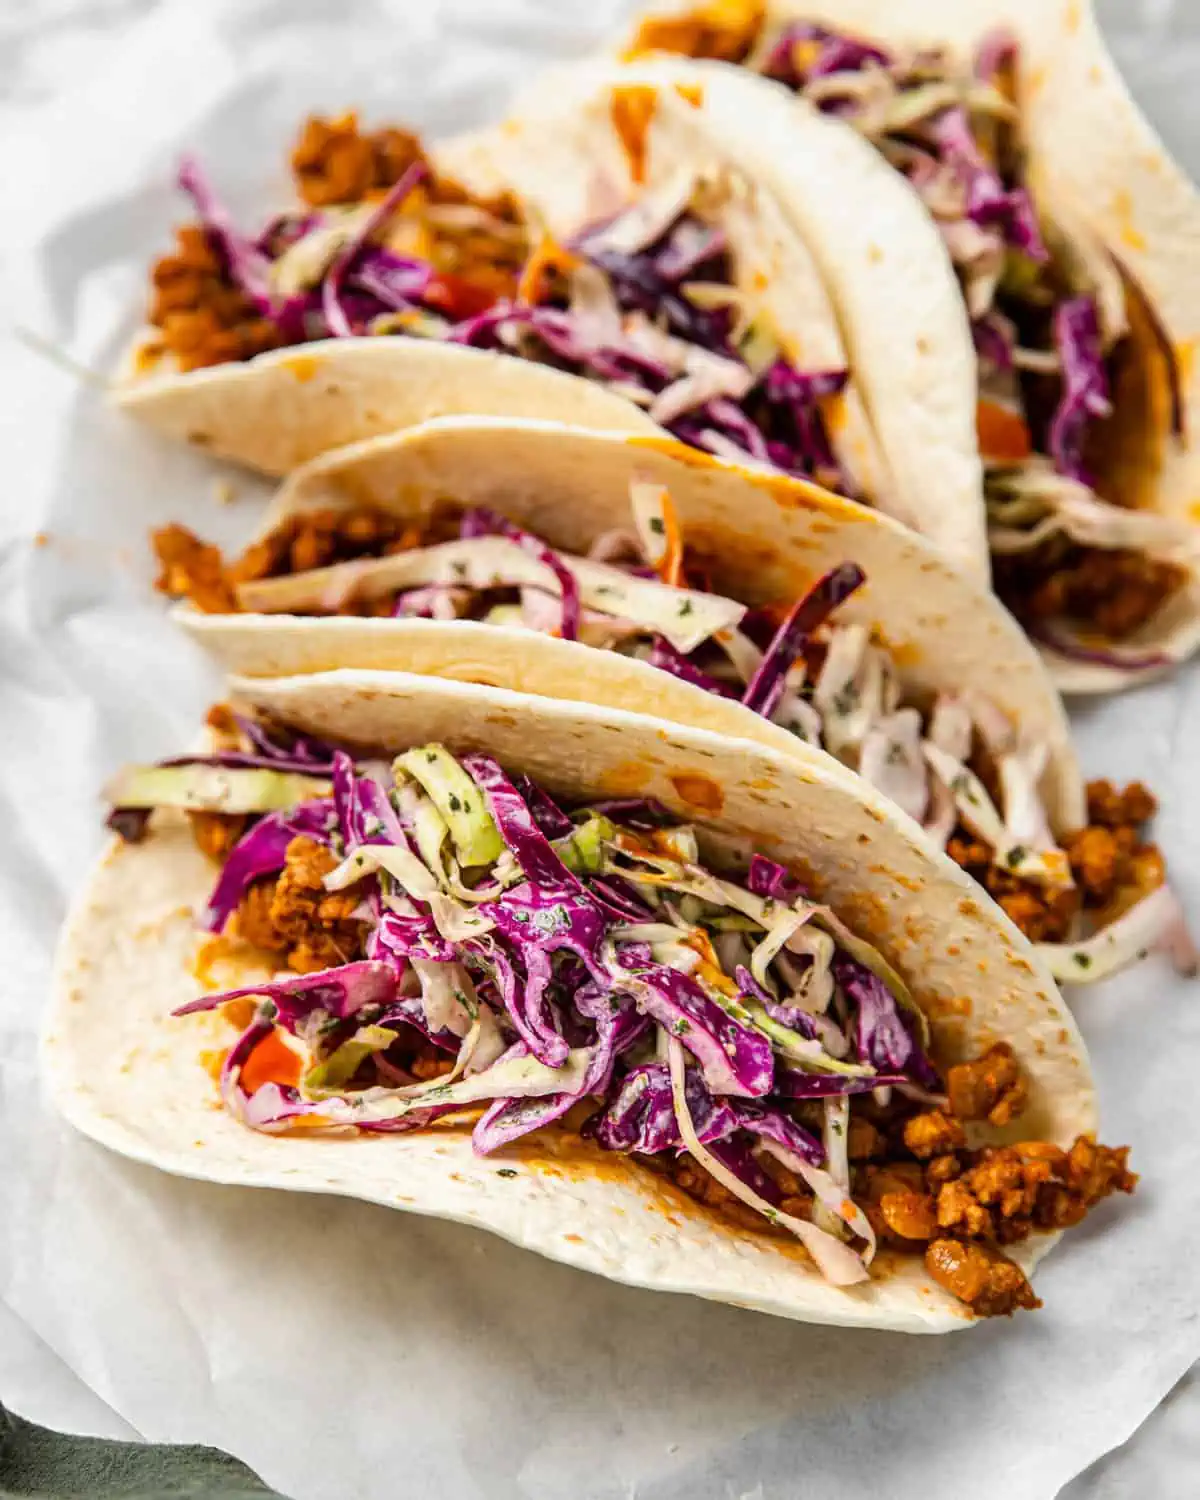 a taco with Mexican ground pork meat topped with cabbage slaw and hot sauce.